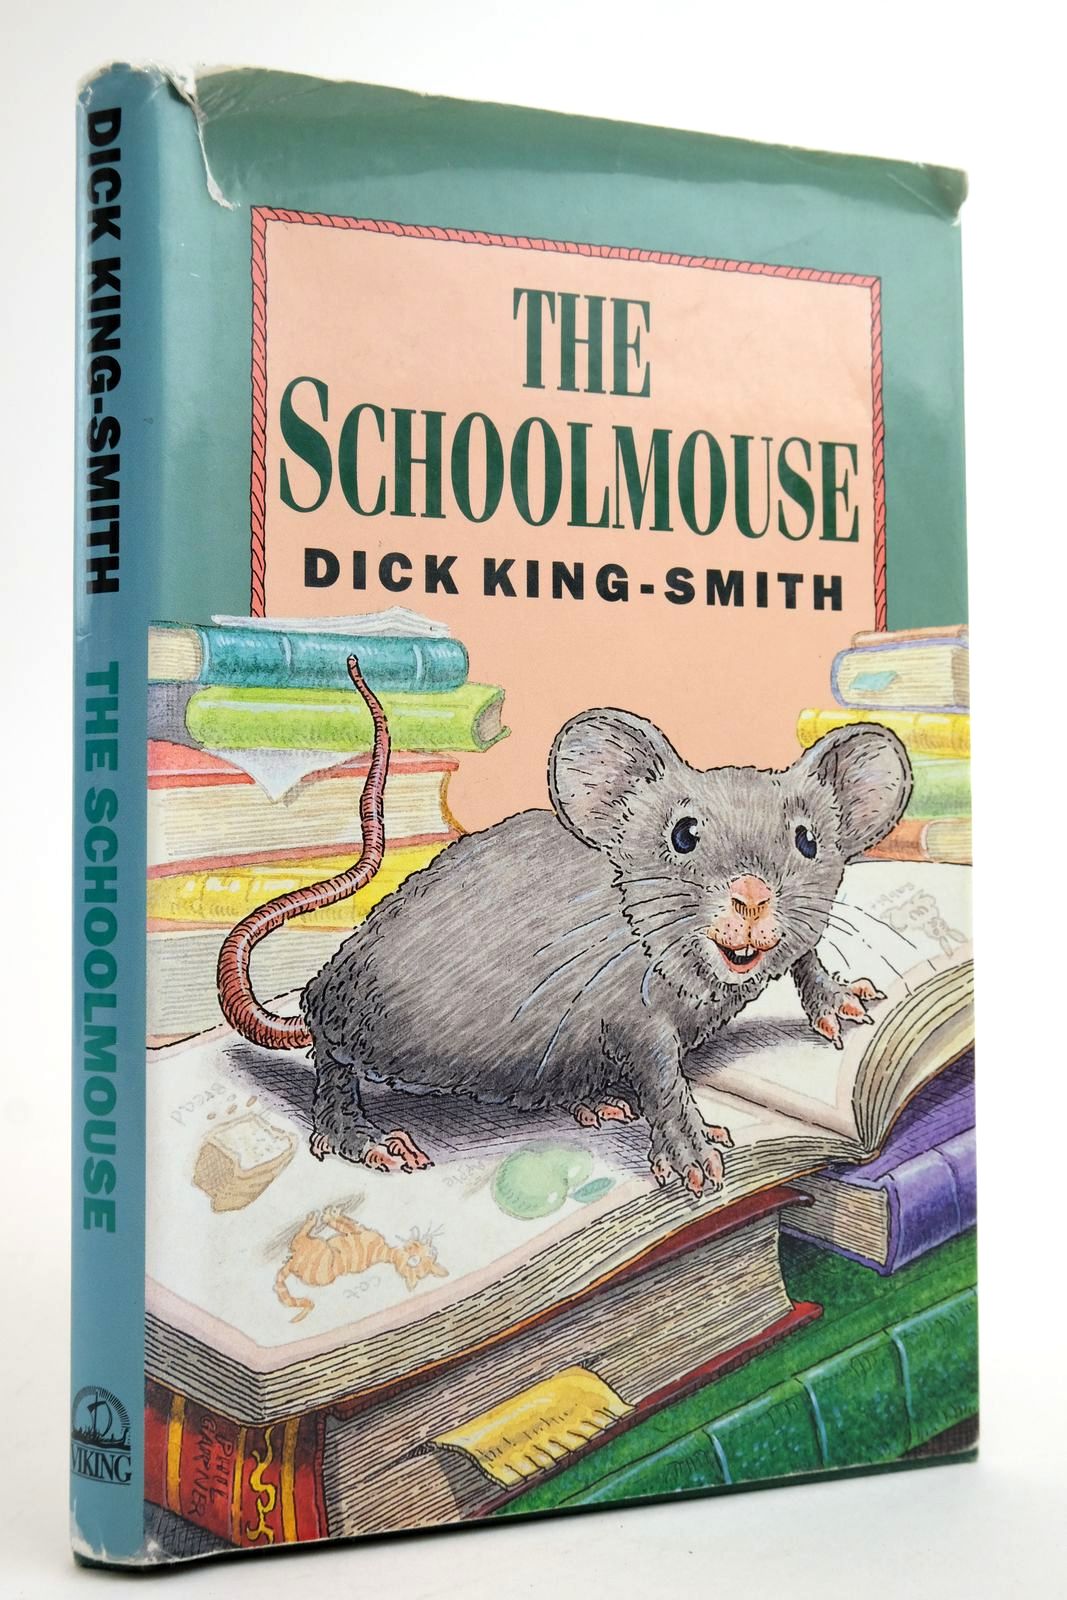 Photo of THE SCHOOLMOUSE written by King-Smith, Dick illustrated by Garner, Phil published by Viking (STOCK CODE: 2135464)  for sale by Stella & Rose's Books